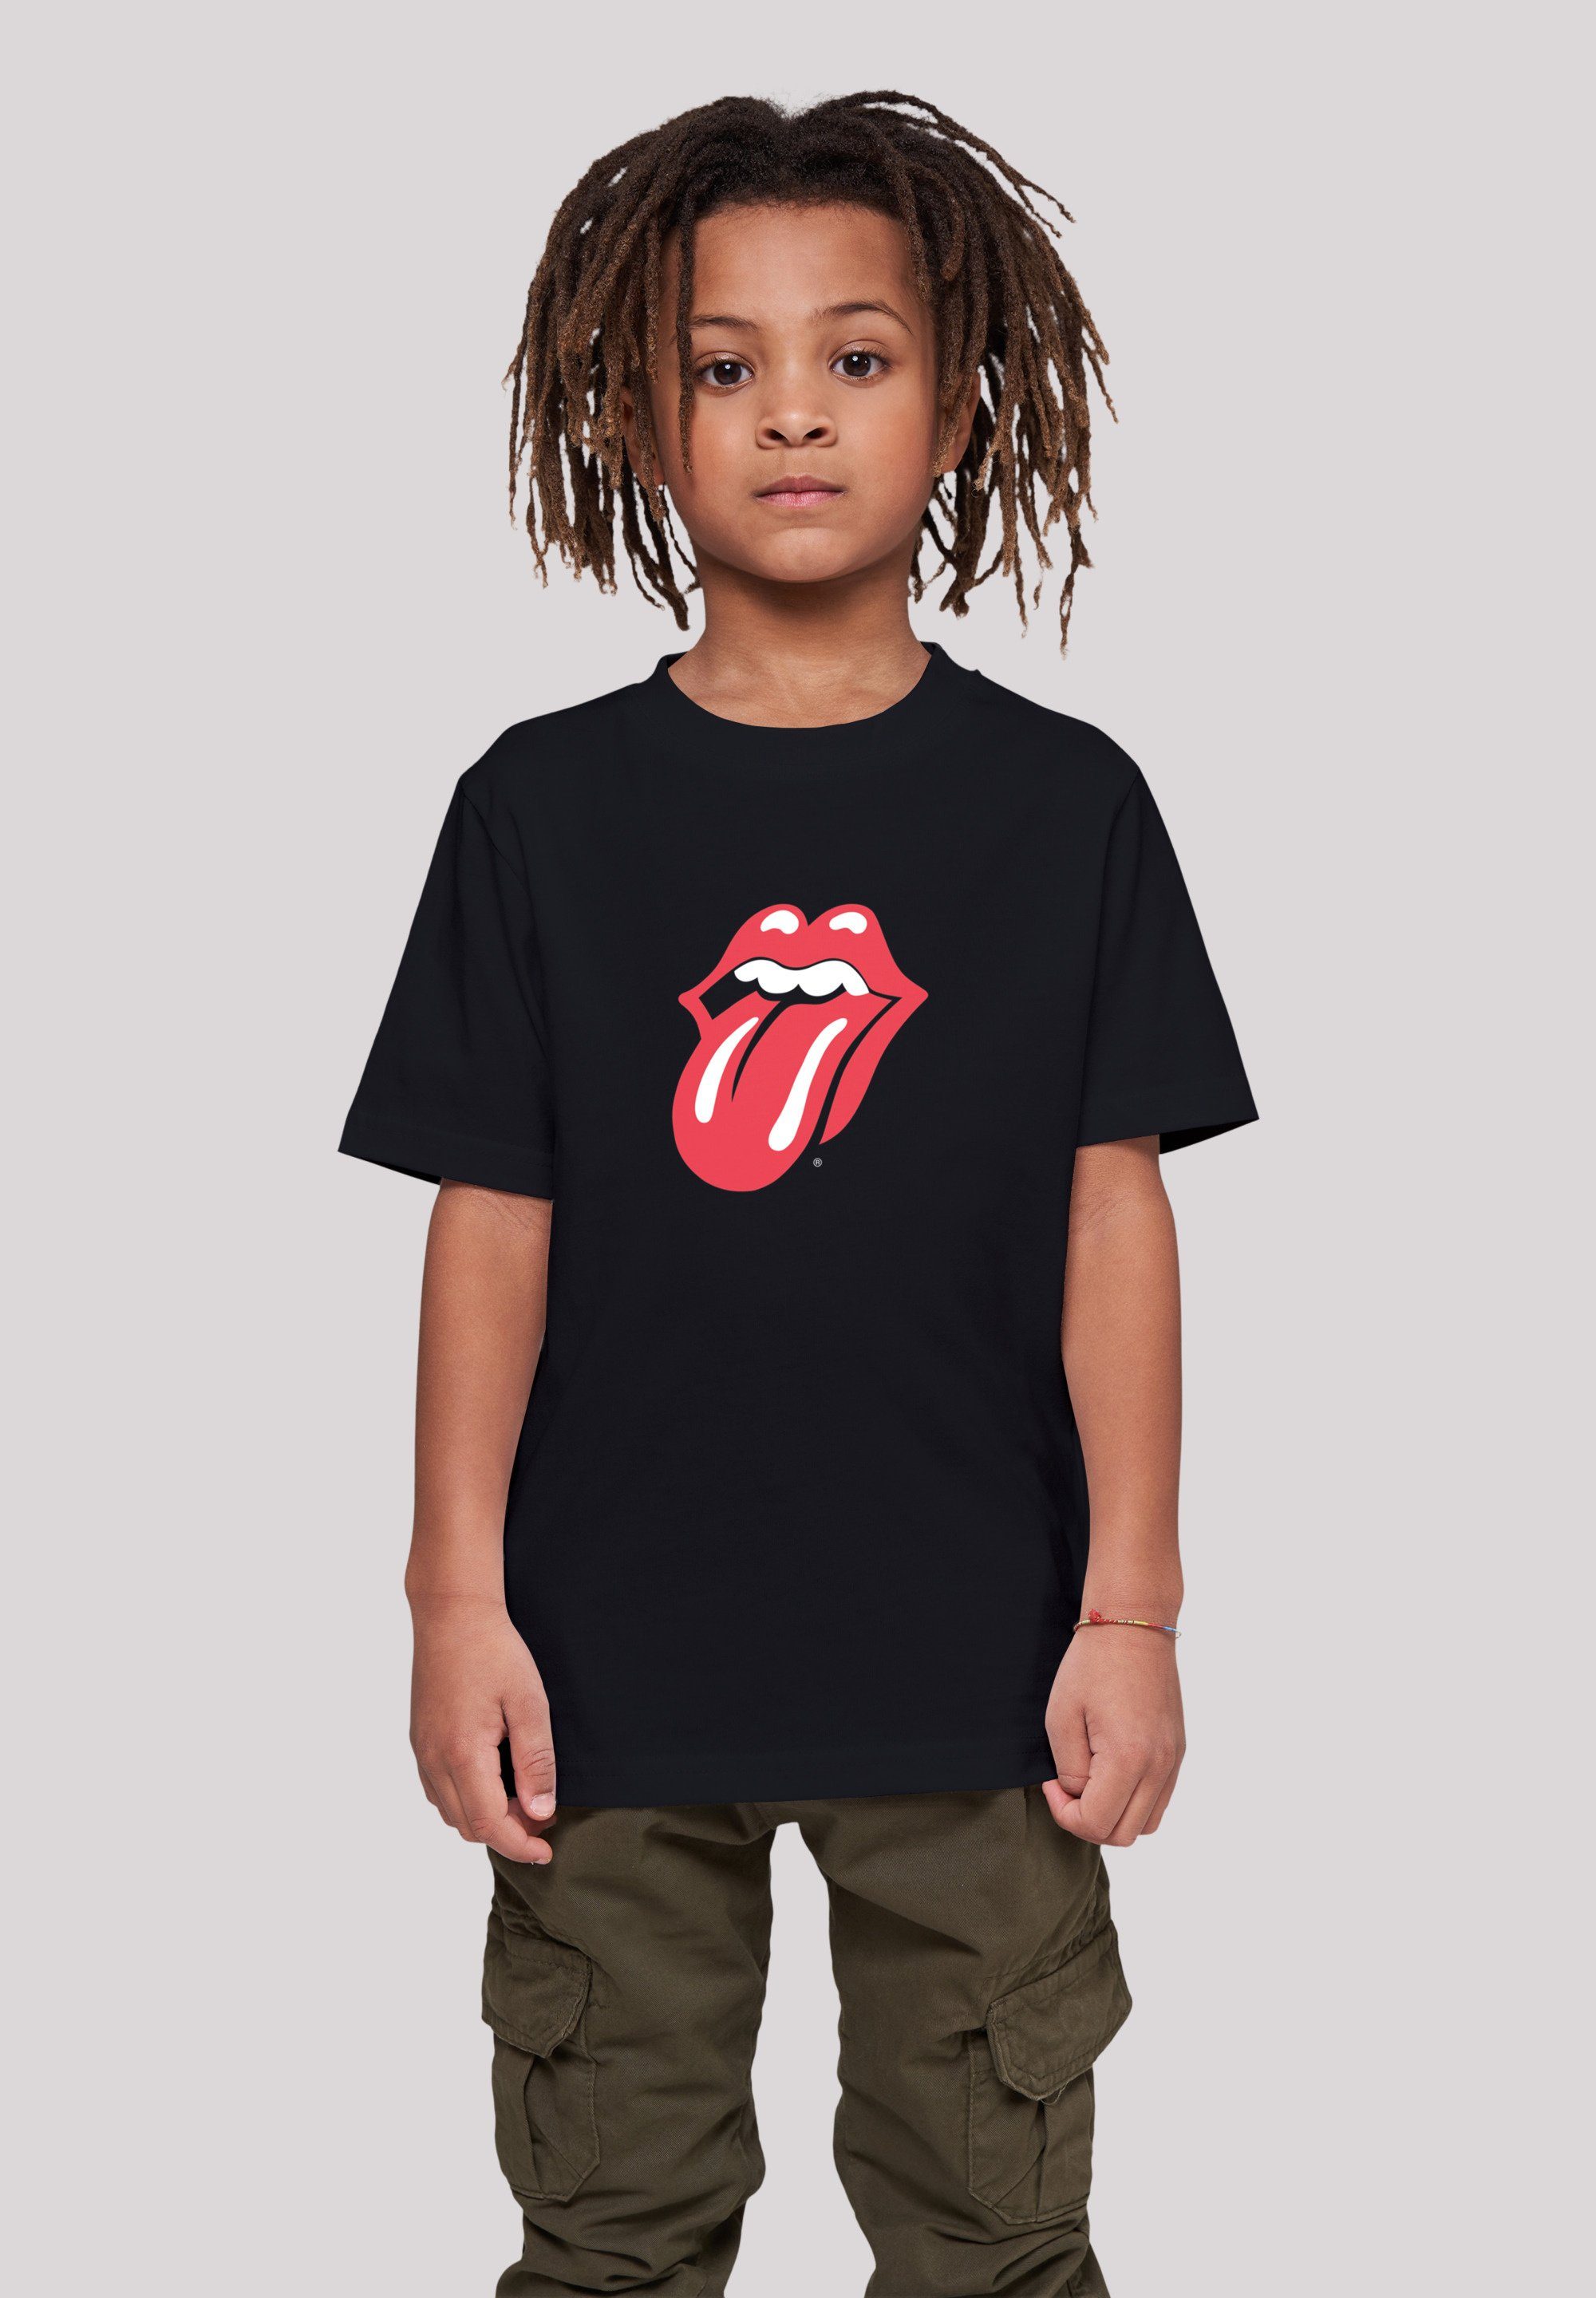 Stones Offiziell The T-Shirt The Rolling T-Shirt Zunge Print, Stones Rolling F4NT4STIC Rot lizenziertes